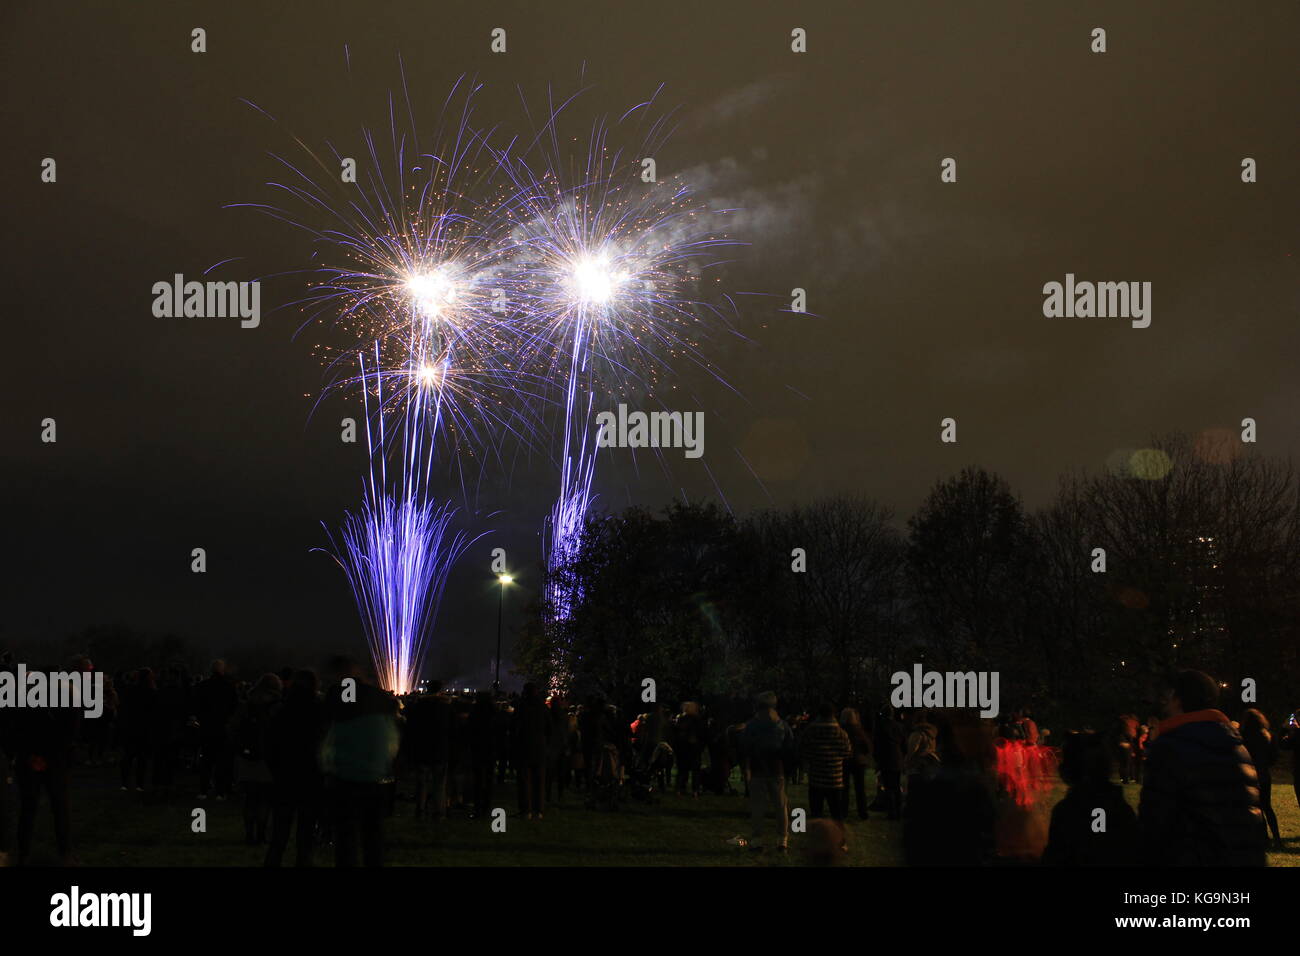 Bonfire Night Weekend Celebrations: Kingsman Fire Dance traditonal Guy Fawkes at The Cumberland arms Pub & Fireworks from Ouseburn Stadium. Newcastle upon Tyne, November 5th. DavidWhinham/AlamyLive Stock Photo